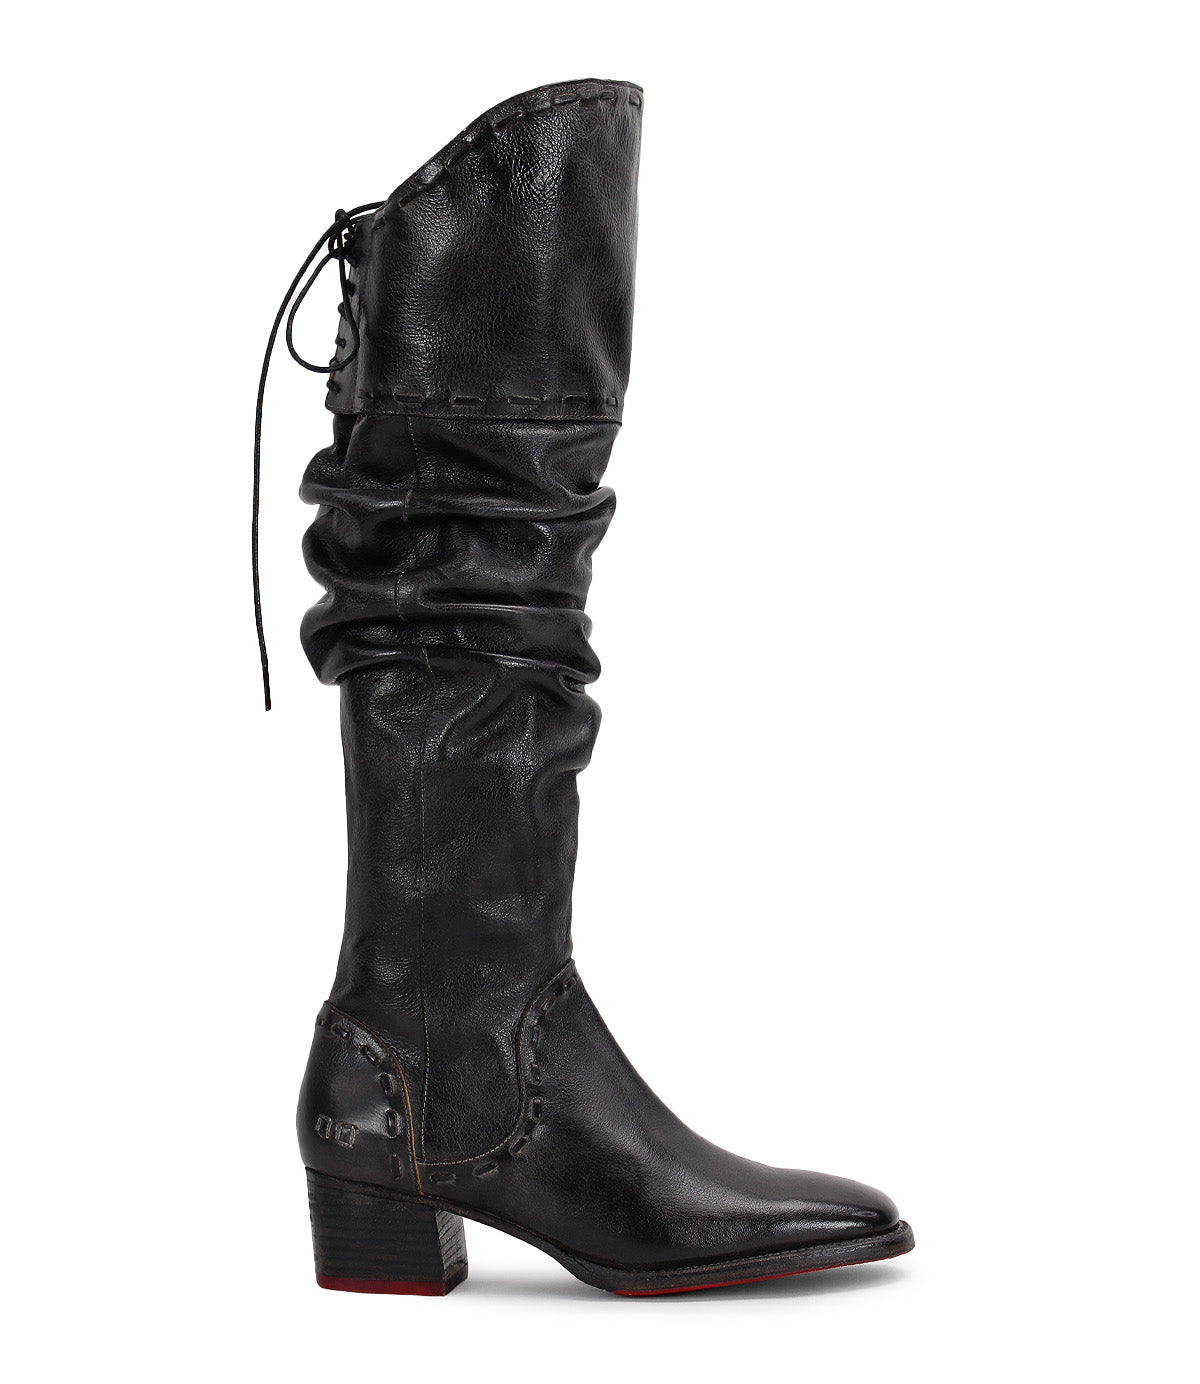 A woman's Leilani black leather over the knee boots by Bed Stu.